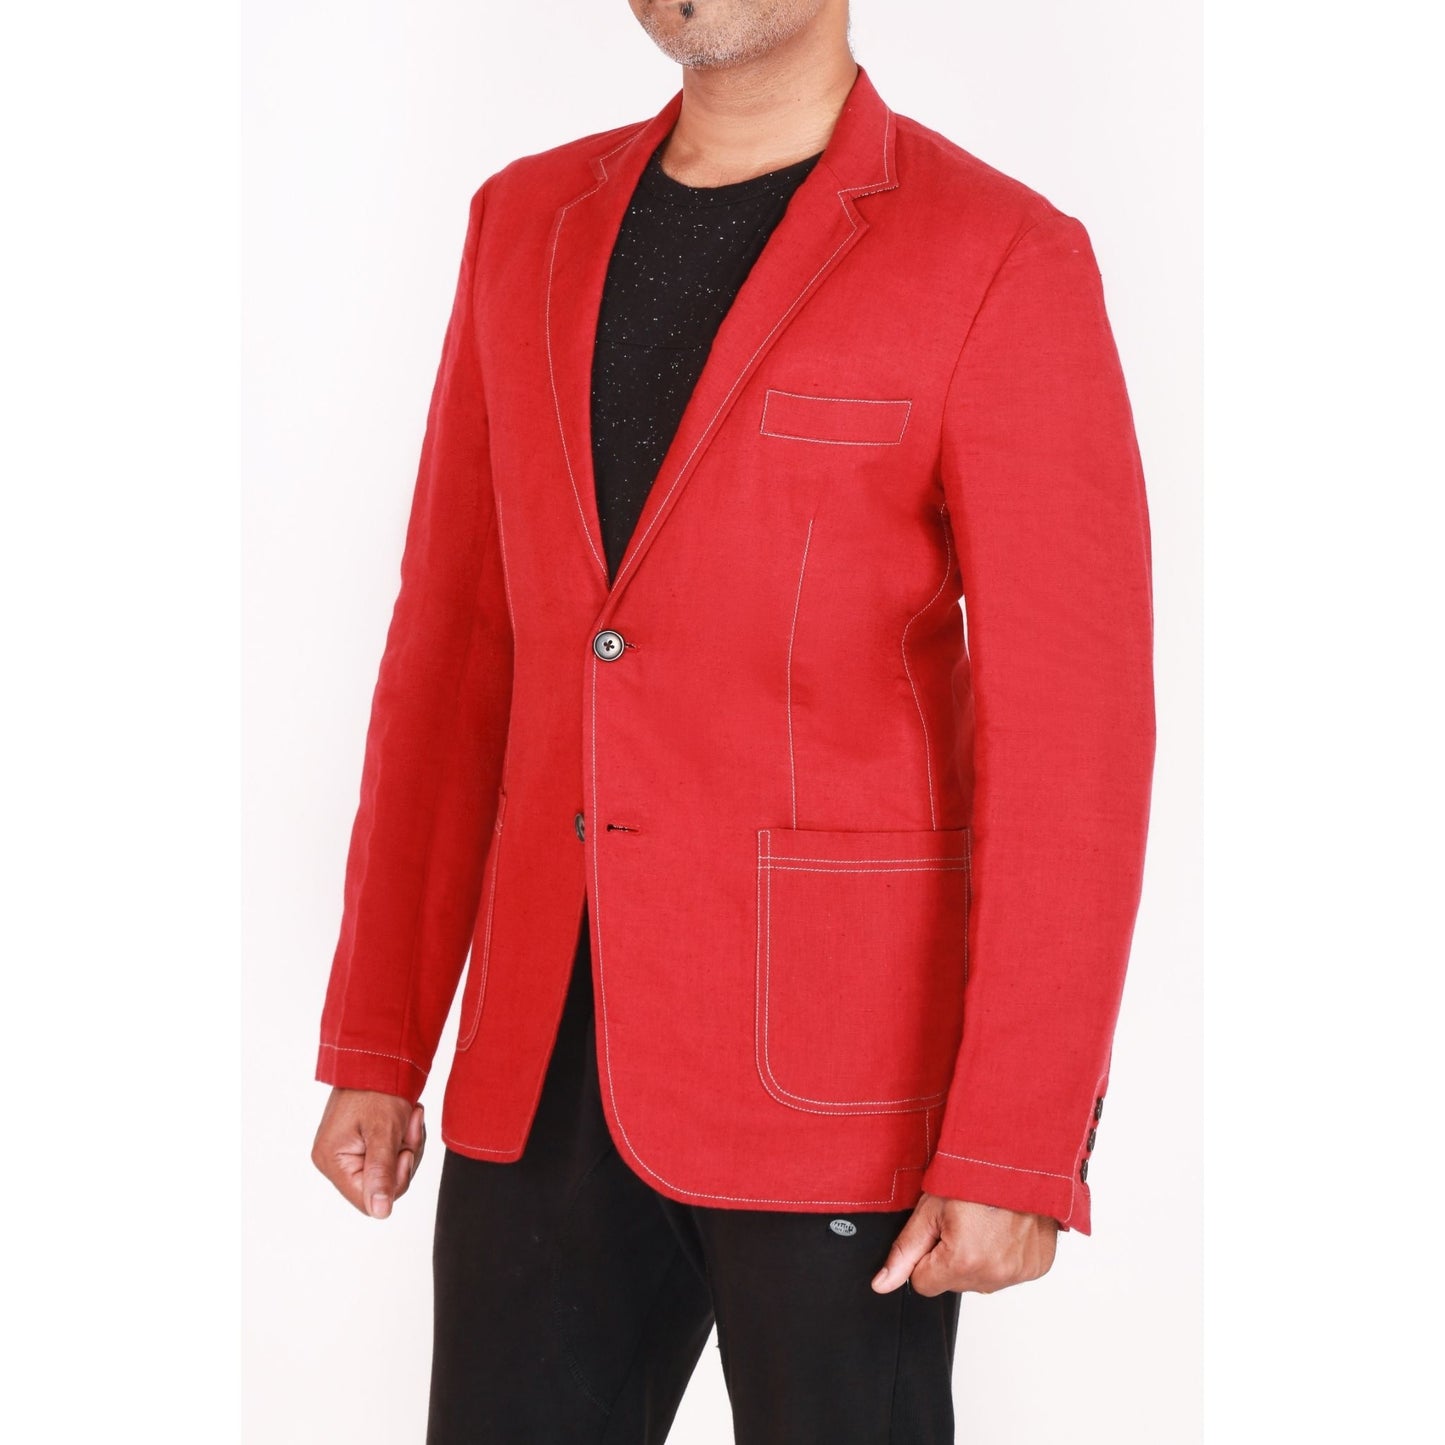 Single breasted jacket in red cotton linen